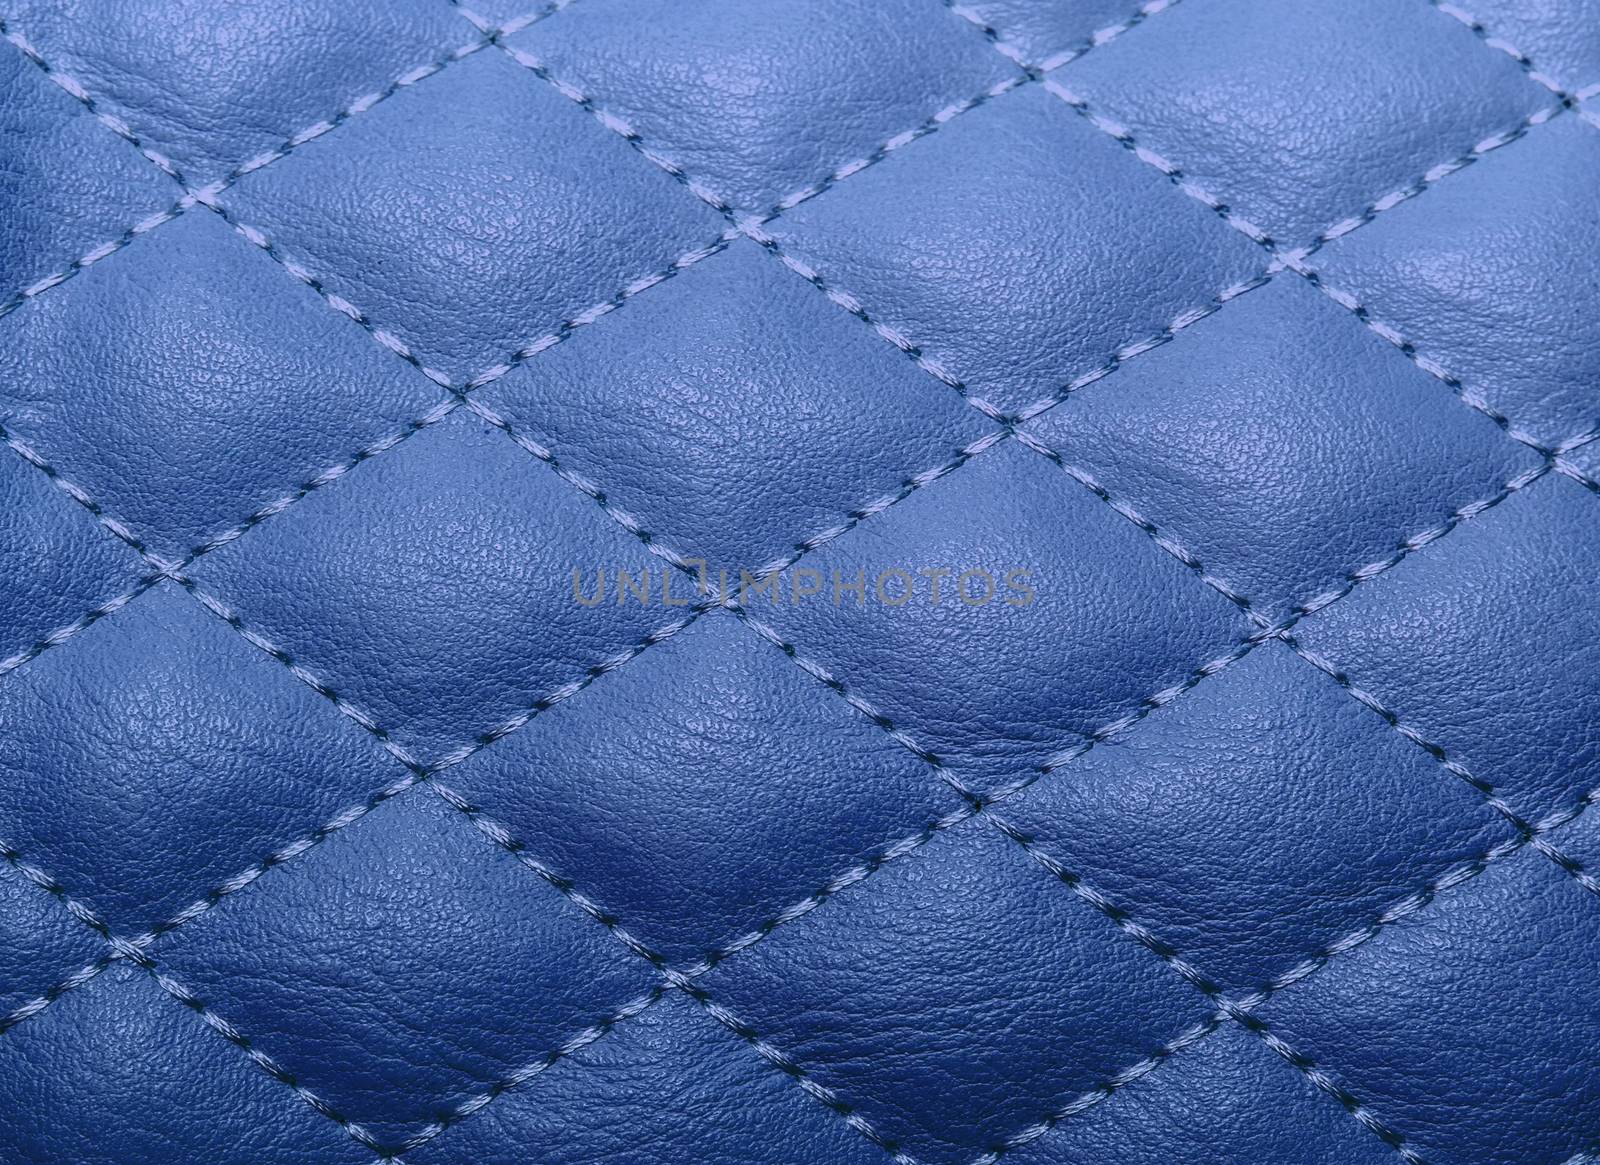 quilted texture artificial leather, stitched with thread for the by KoliadzynskaIryna